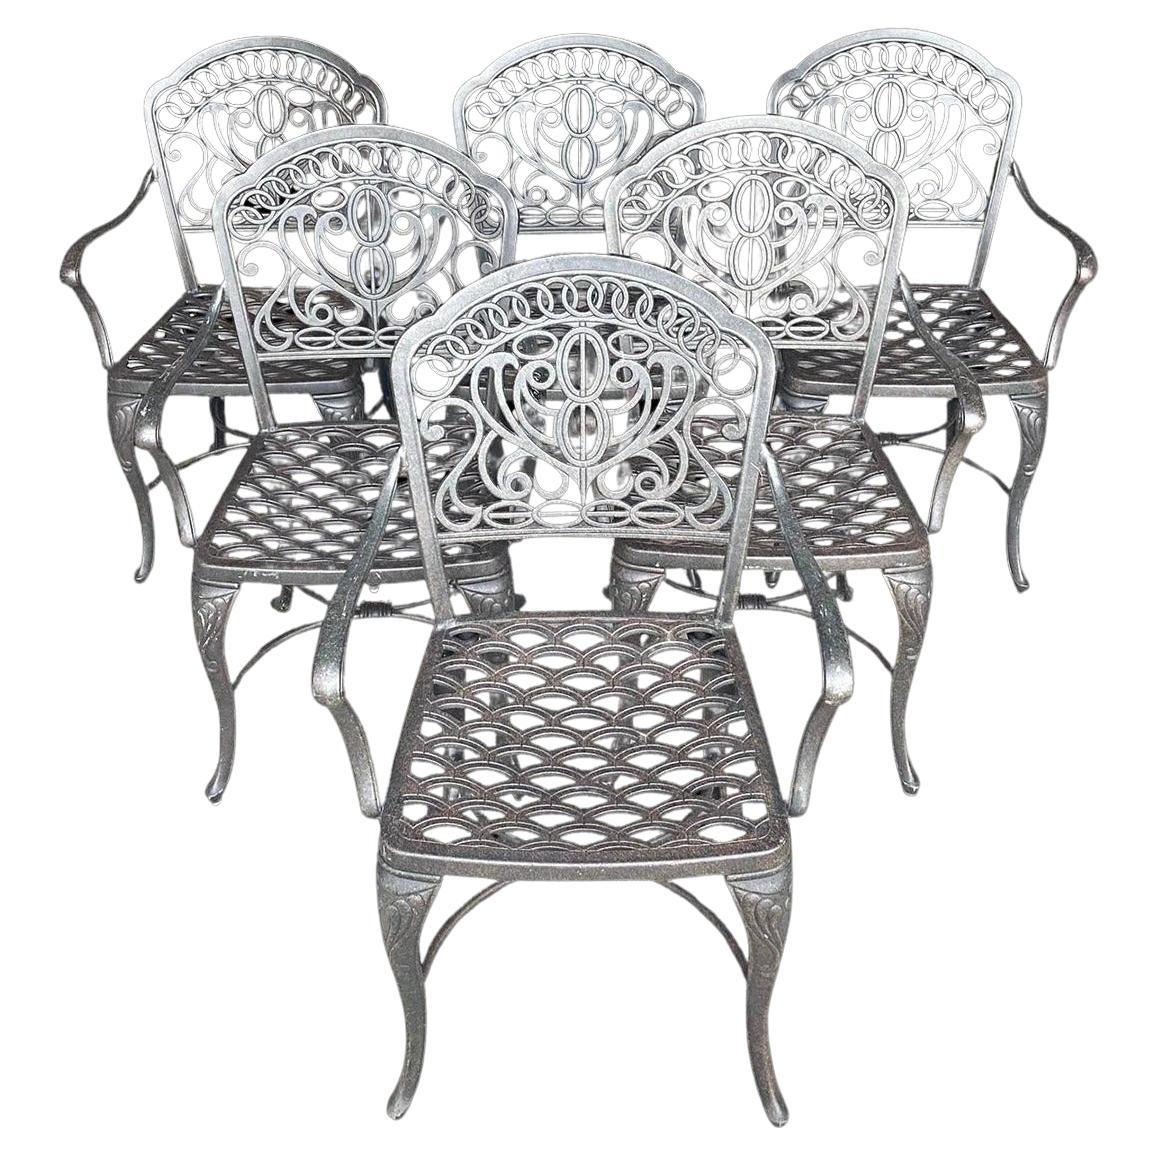 Vintage Coastal Hanamint Cast Aluminum Outdoor Dining Chairs - Set of 6 For Sale